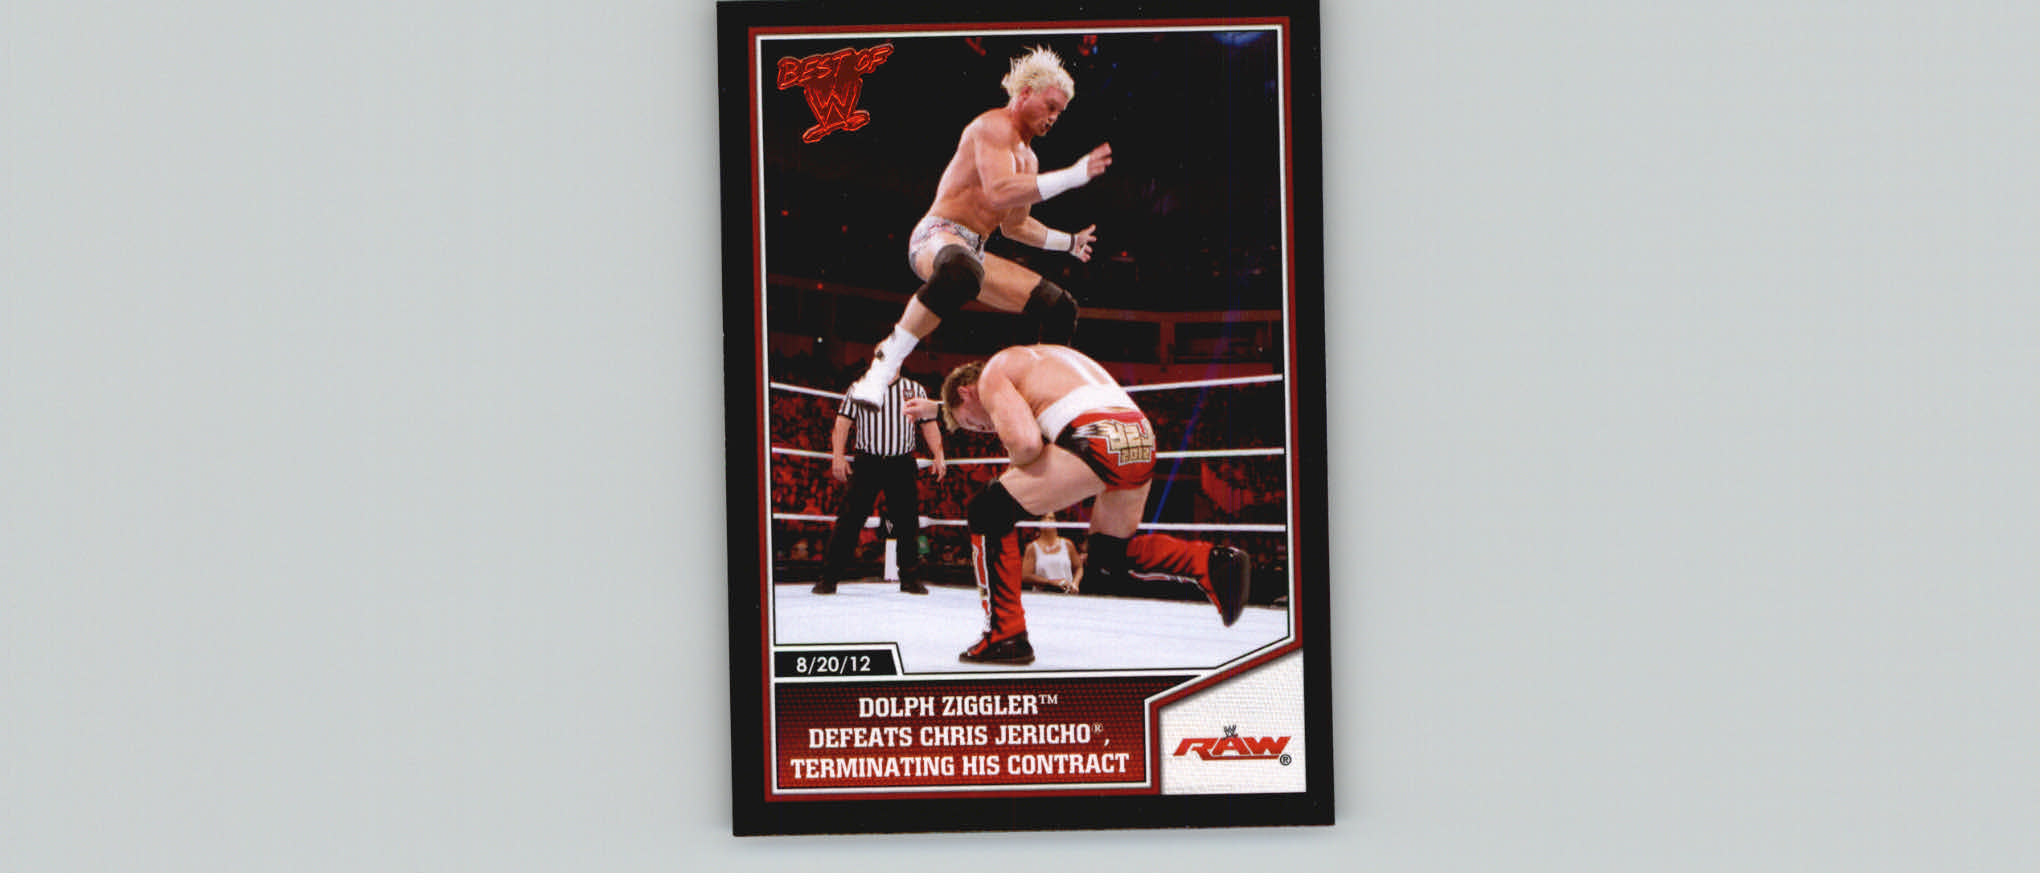 2013 Topps Best of WWE #43 Dolph Ziggler Defeats Chris Jericho, Terminating his Contract